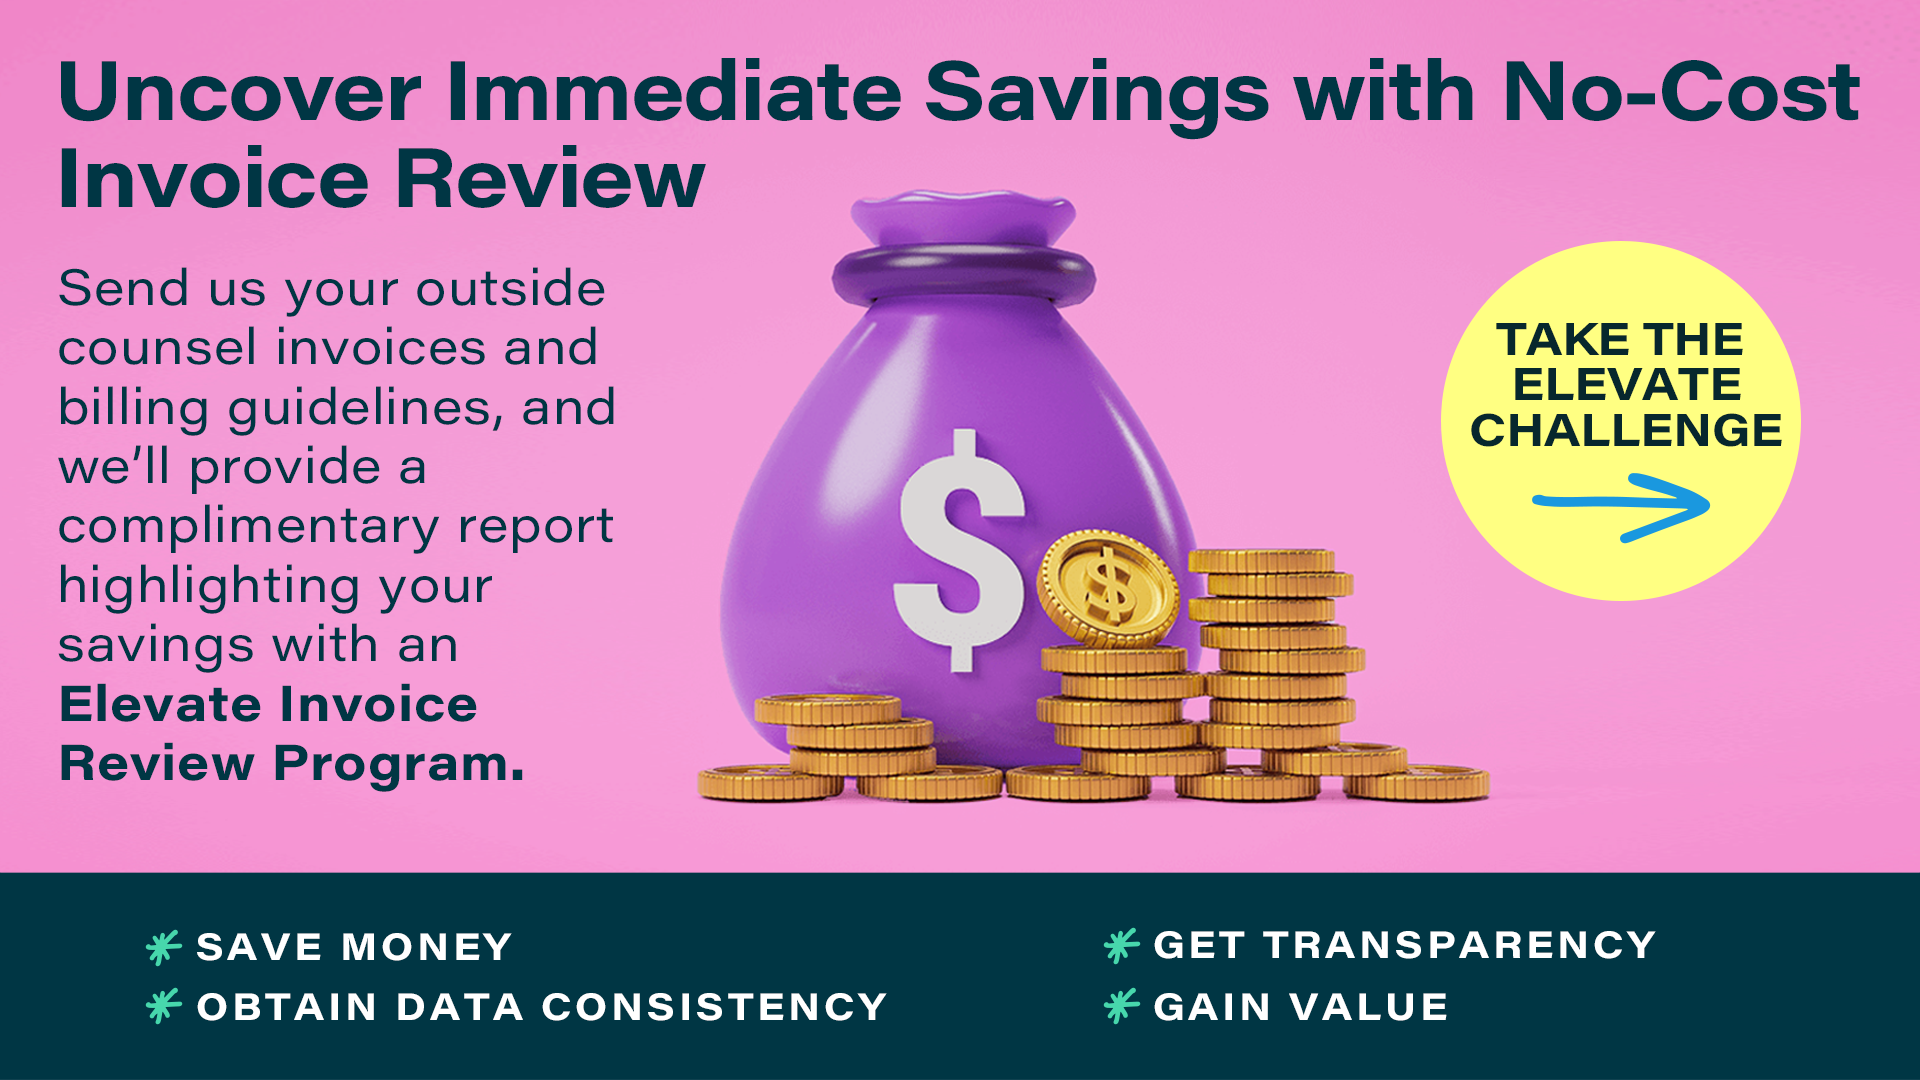 No-Cost Invoice Review